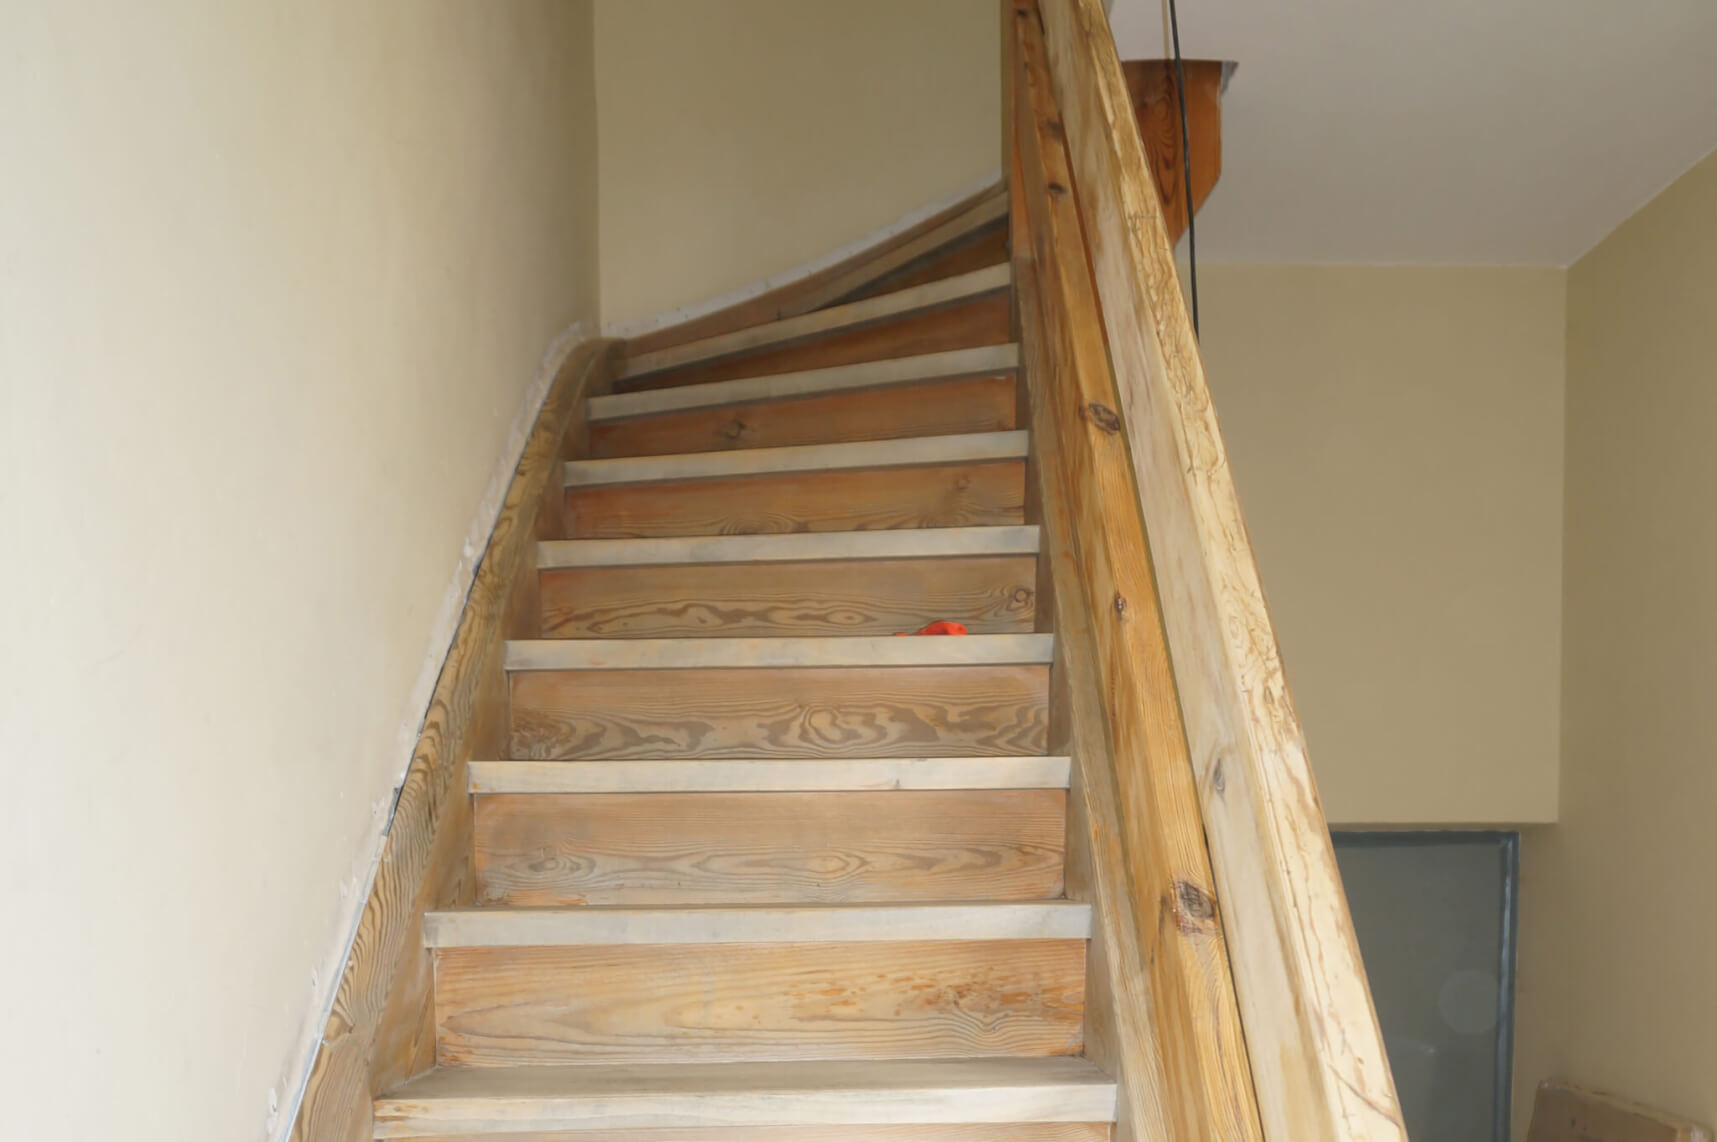 Staircase in the house gets a new coating in wood as part of a modern interior design 02